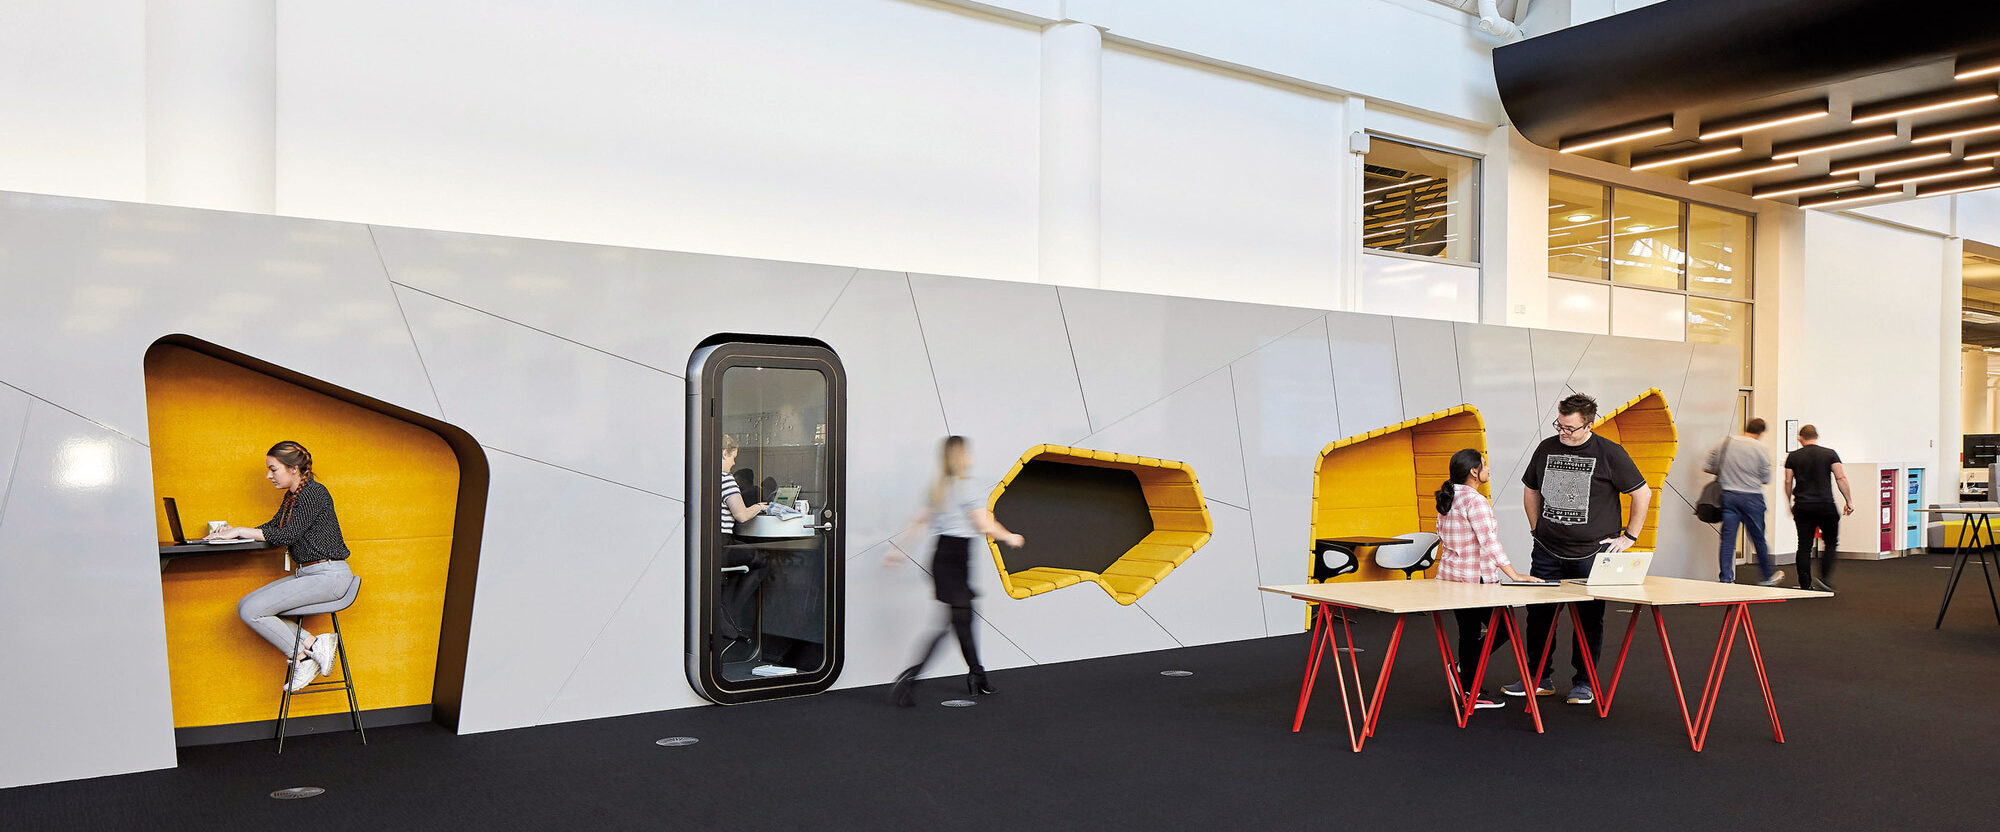 Modern office interior featuring honeycomb-inspired work pods with vibrant yellow accents, providing private nooks for concentration. The open floor plan includes high ceilings and skylights, enhancing natural light and spaciousness. A communal work table with red stools encourages collaboration.